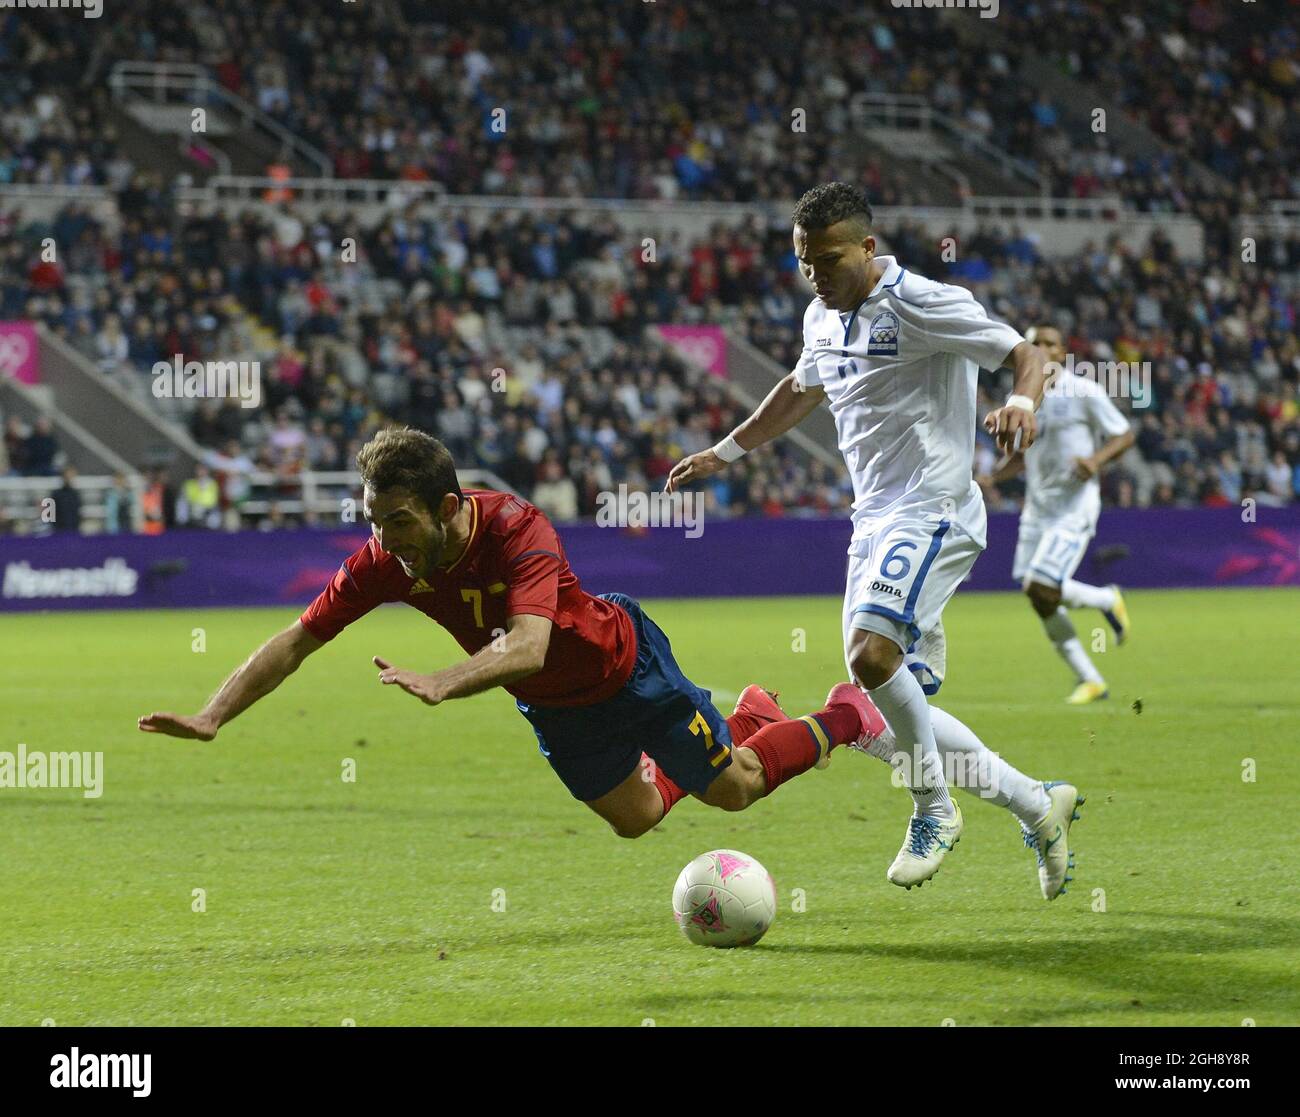 Spain's Adrian Lopez (L) is brought down by Honduras' Arnold Peralta in the penalty area but no decision is given during the London Olympic 2012 first round Group D men's match between Spain v Honduras at the St. James' Park, Newcastle upon Tyne on the 29th July 2012. Stock Photo